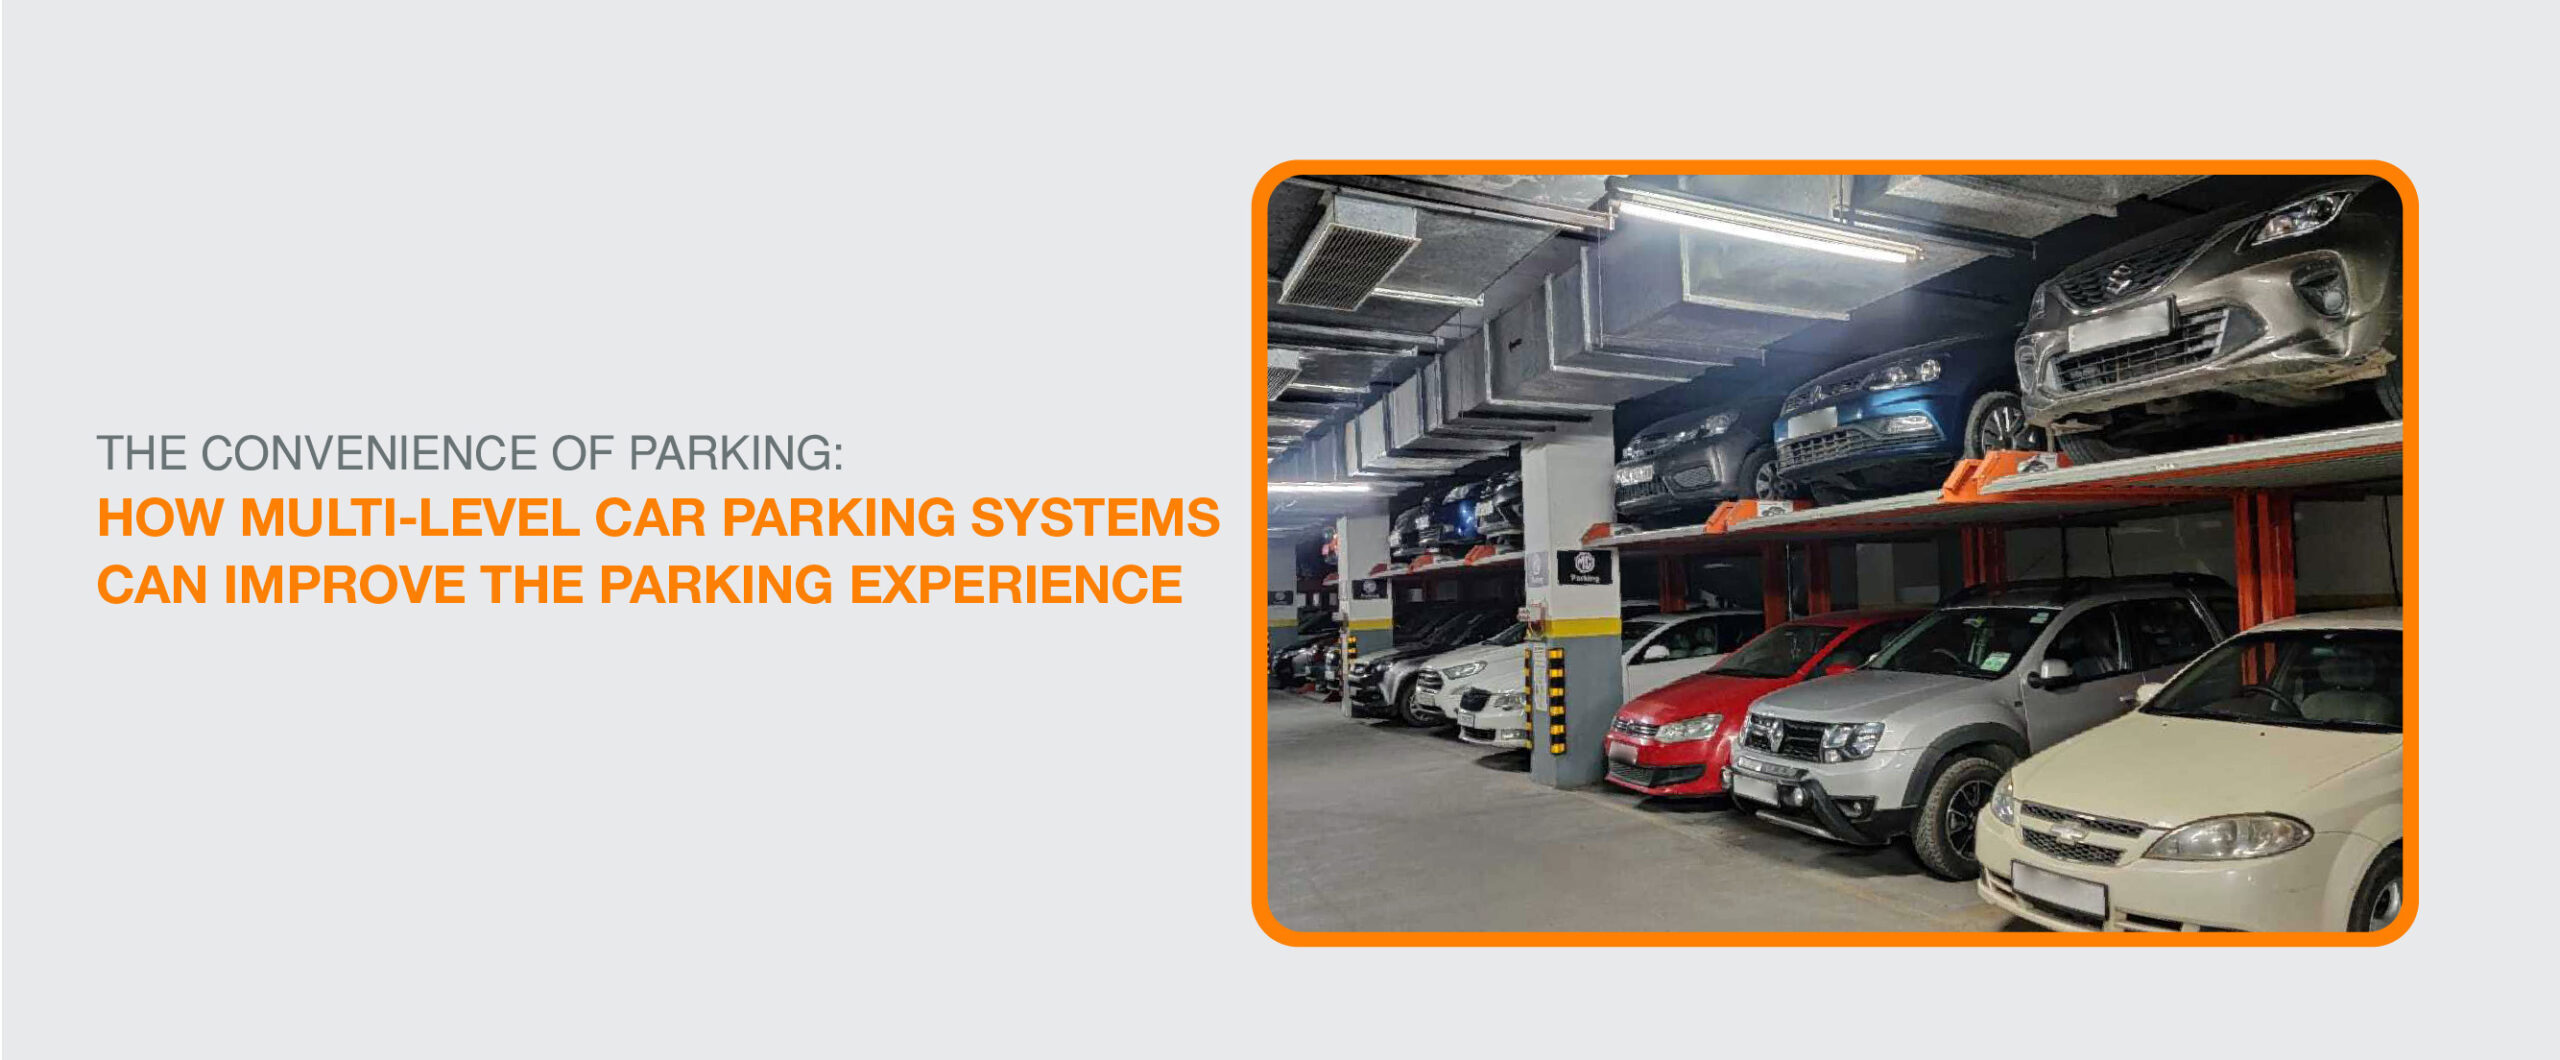 The Convenience of Parking: How Multi-Level Car Parking Systems Can Improve The Parking Experience